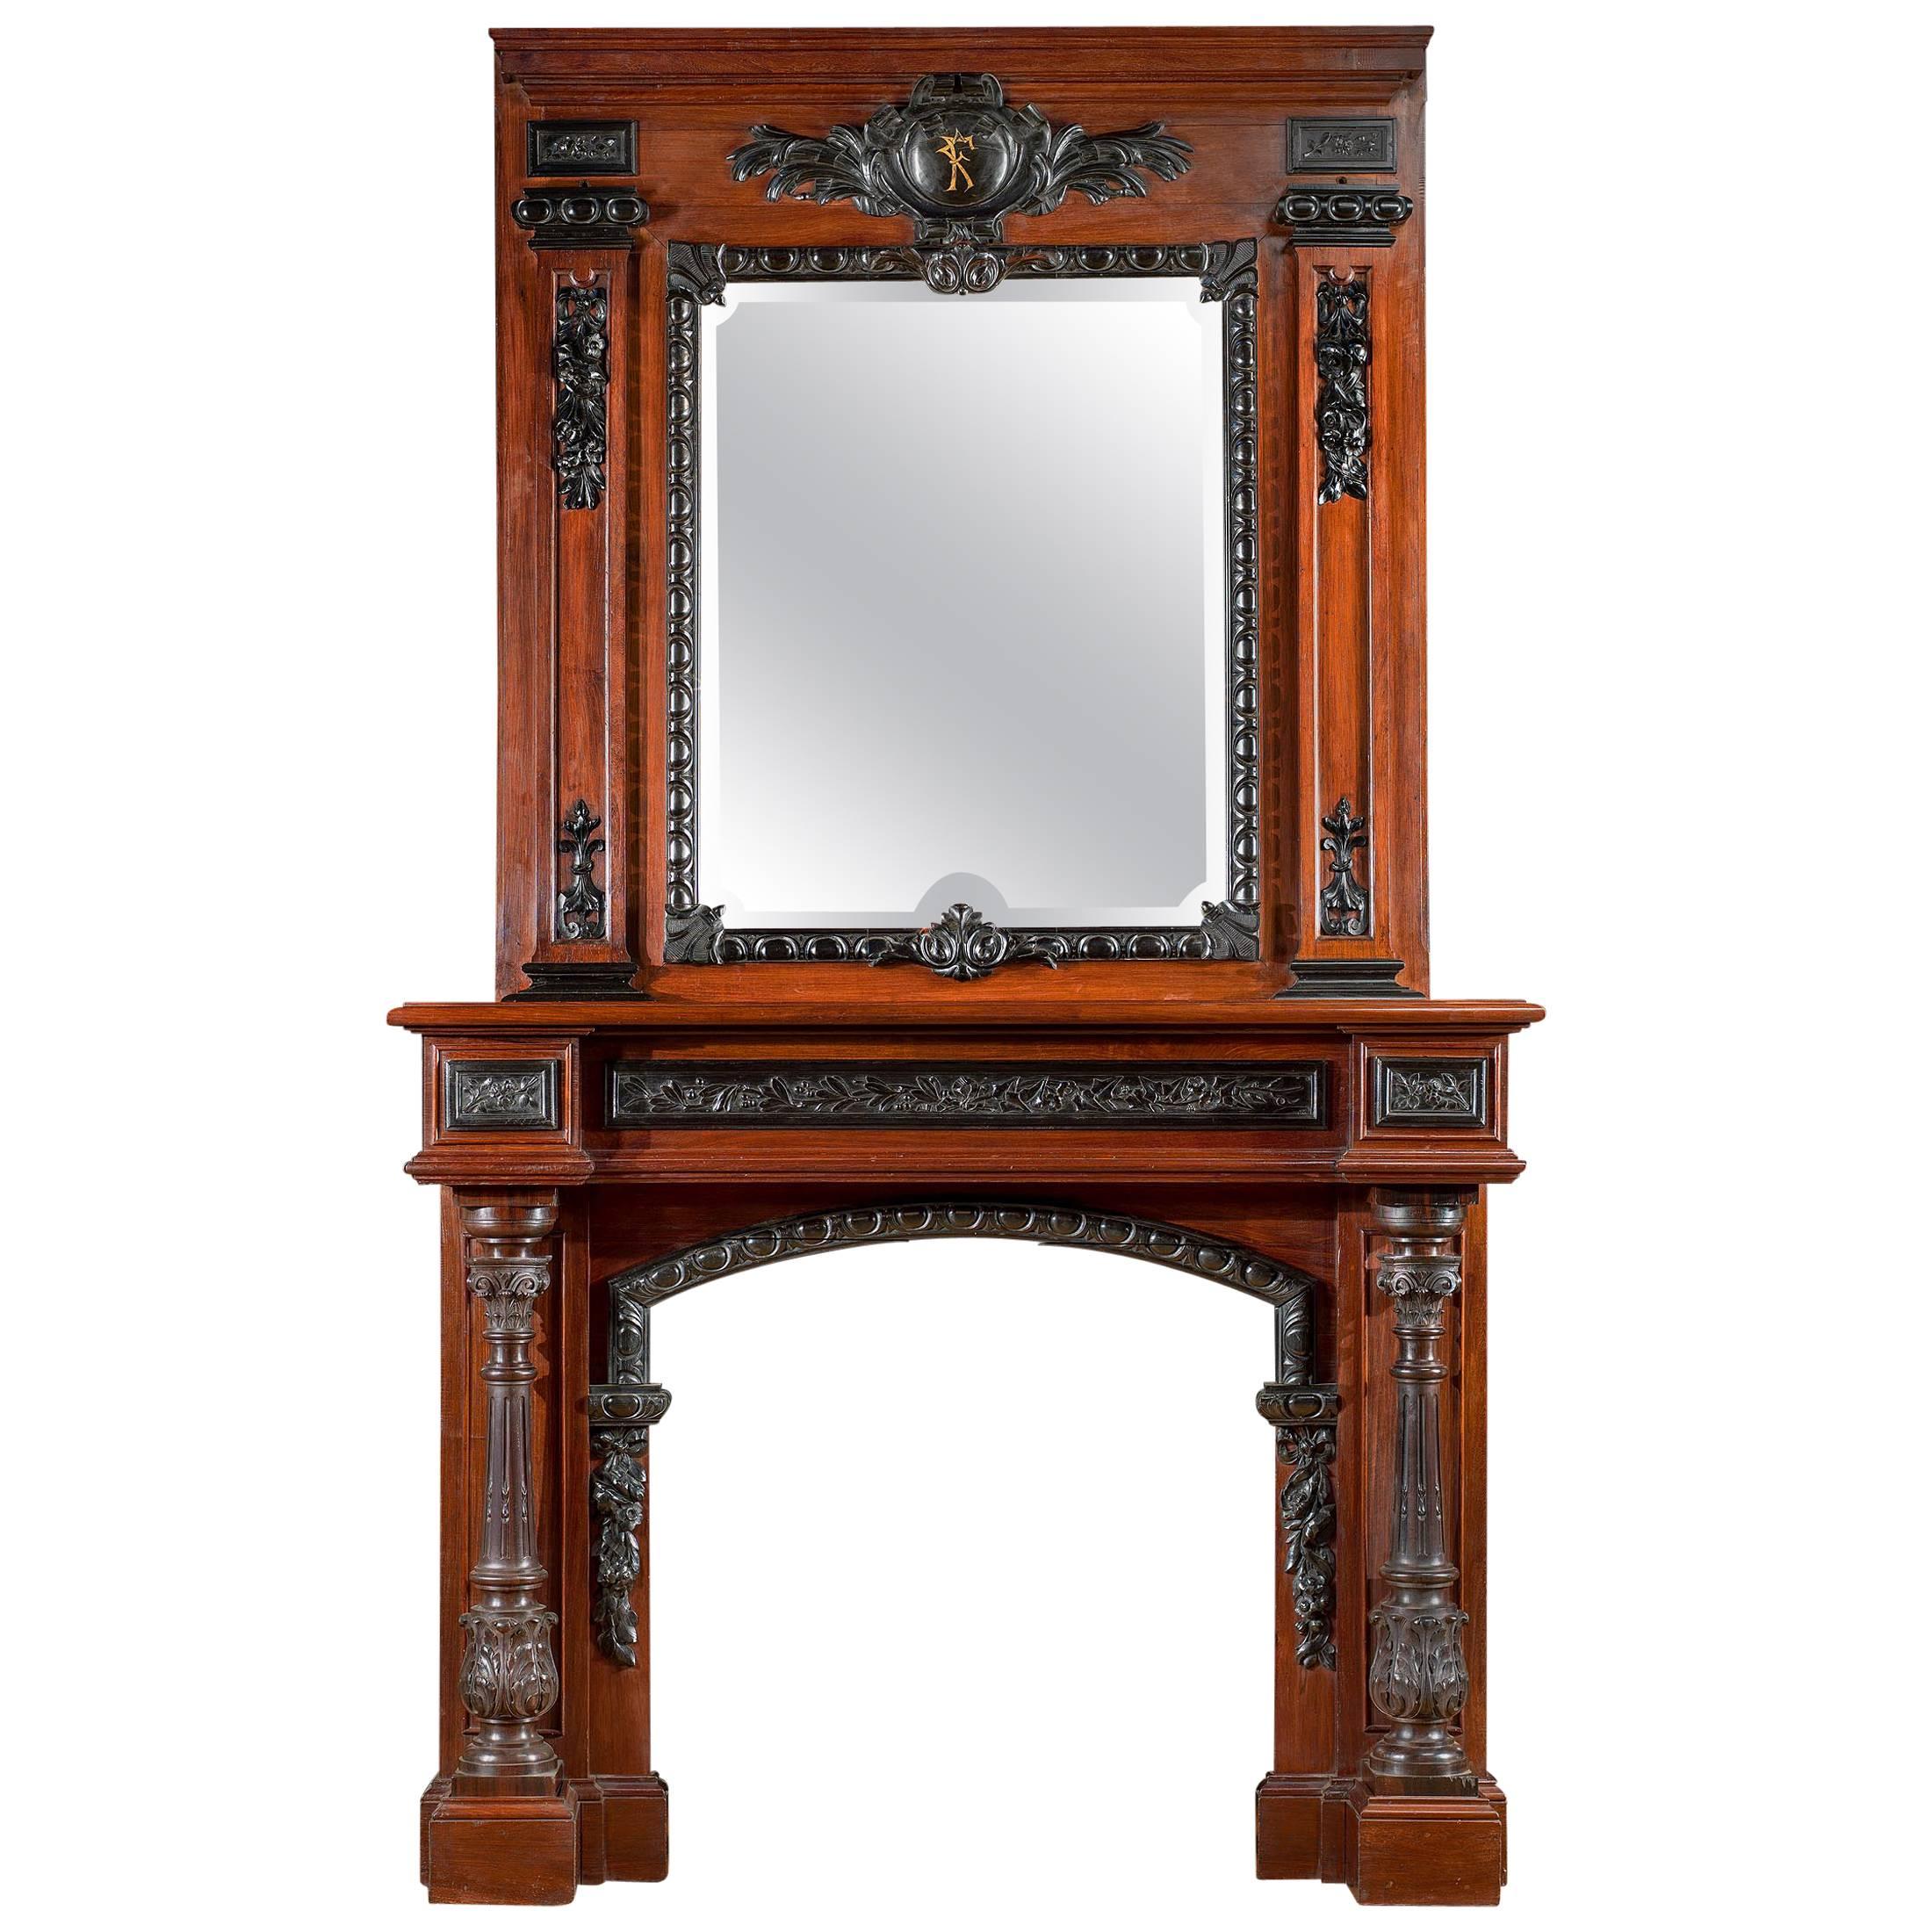 Rosewood and Ebony Antique Fireplace Mantel in the French Baroque Manner